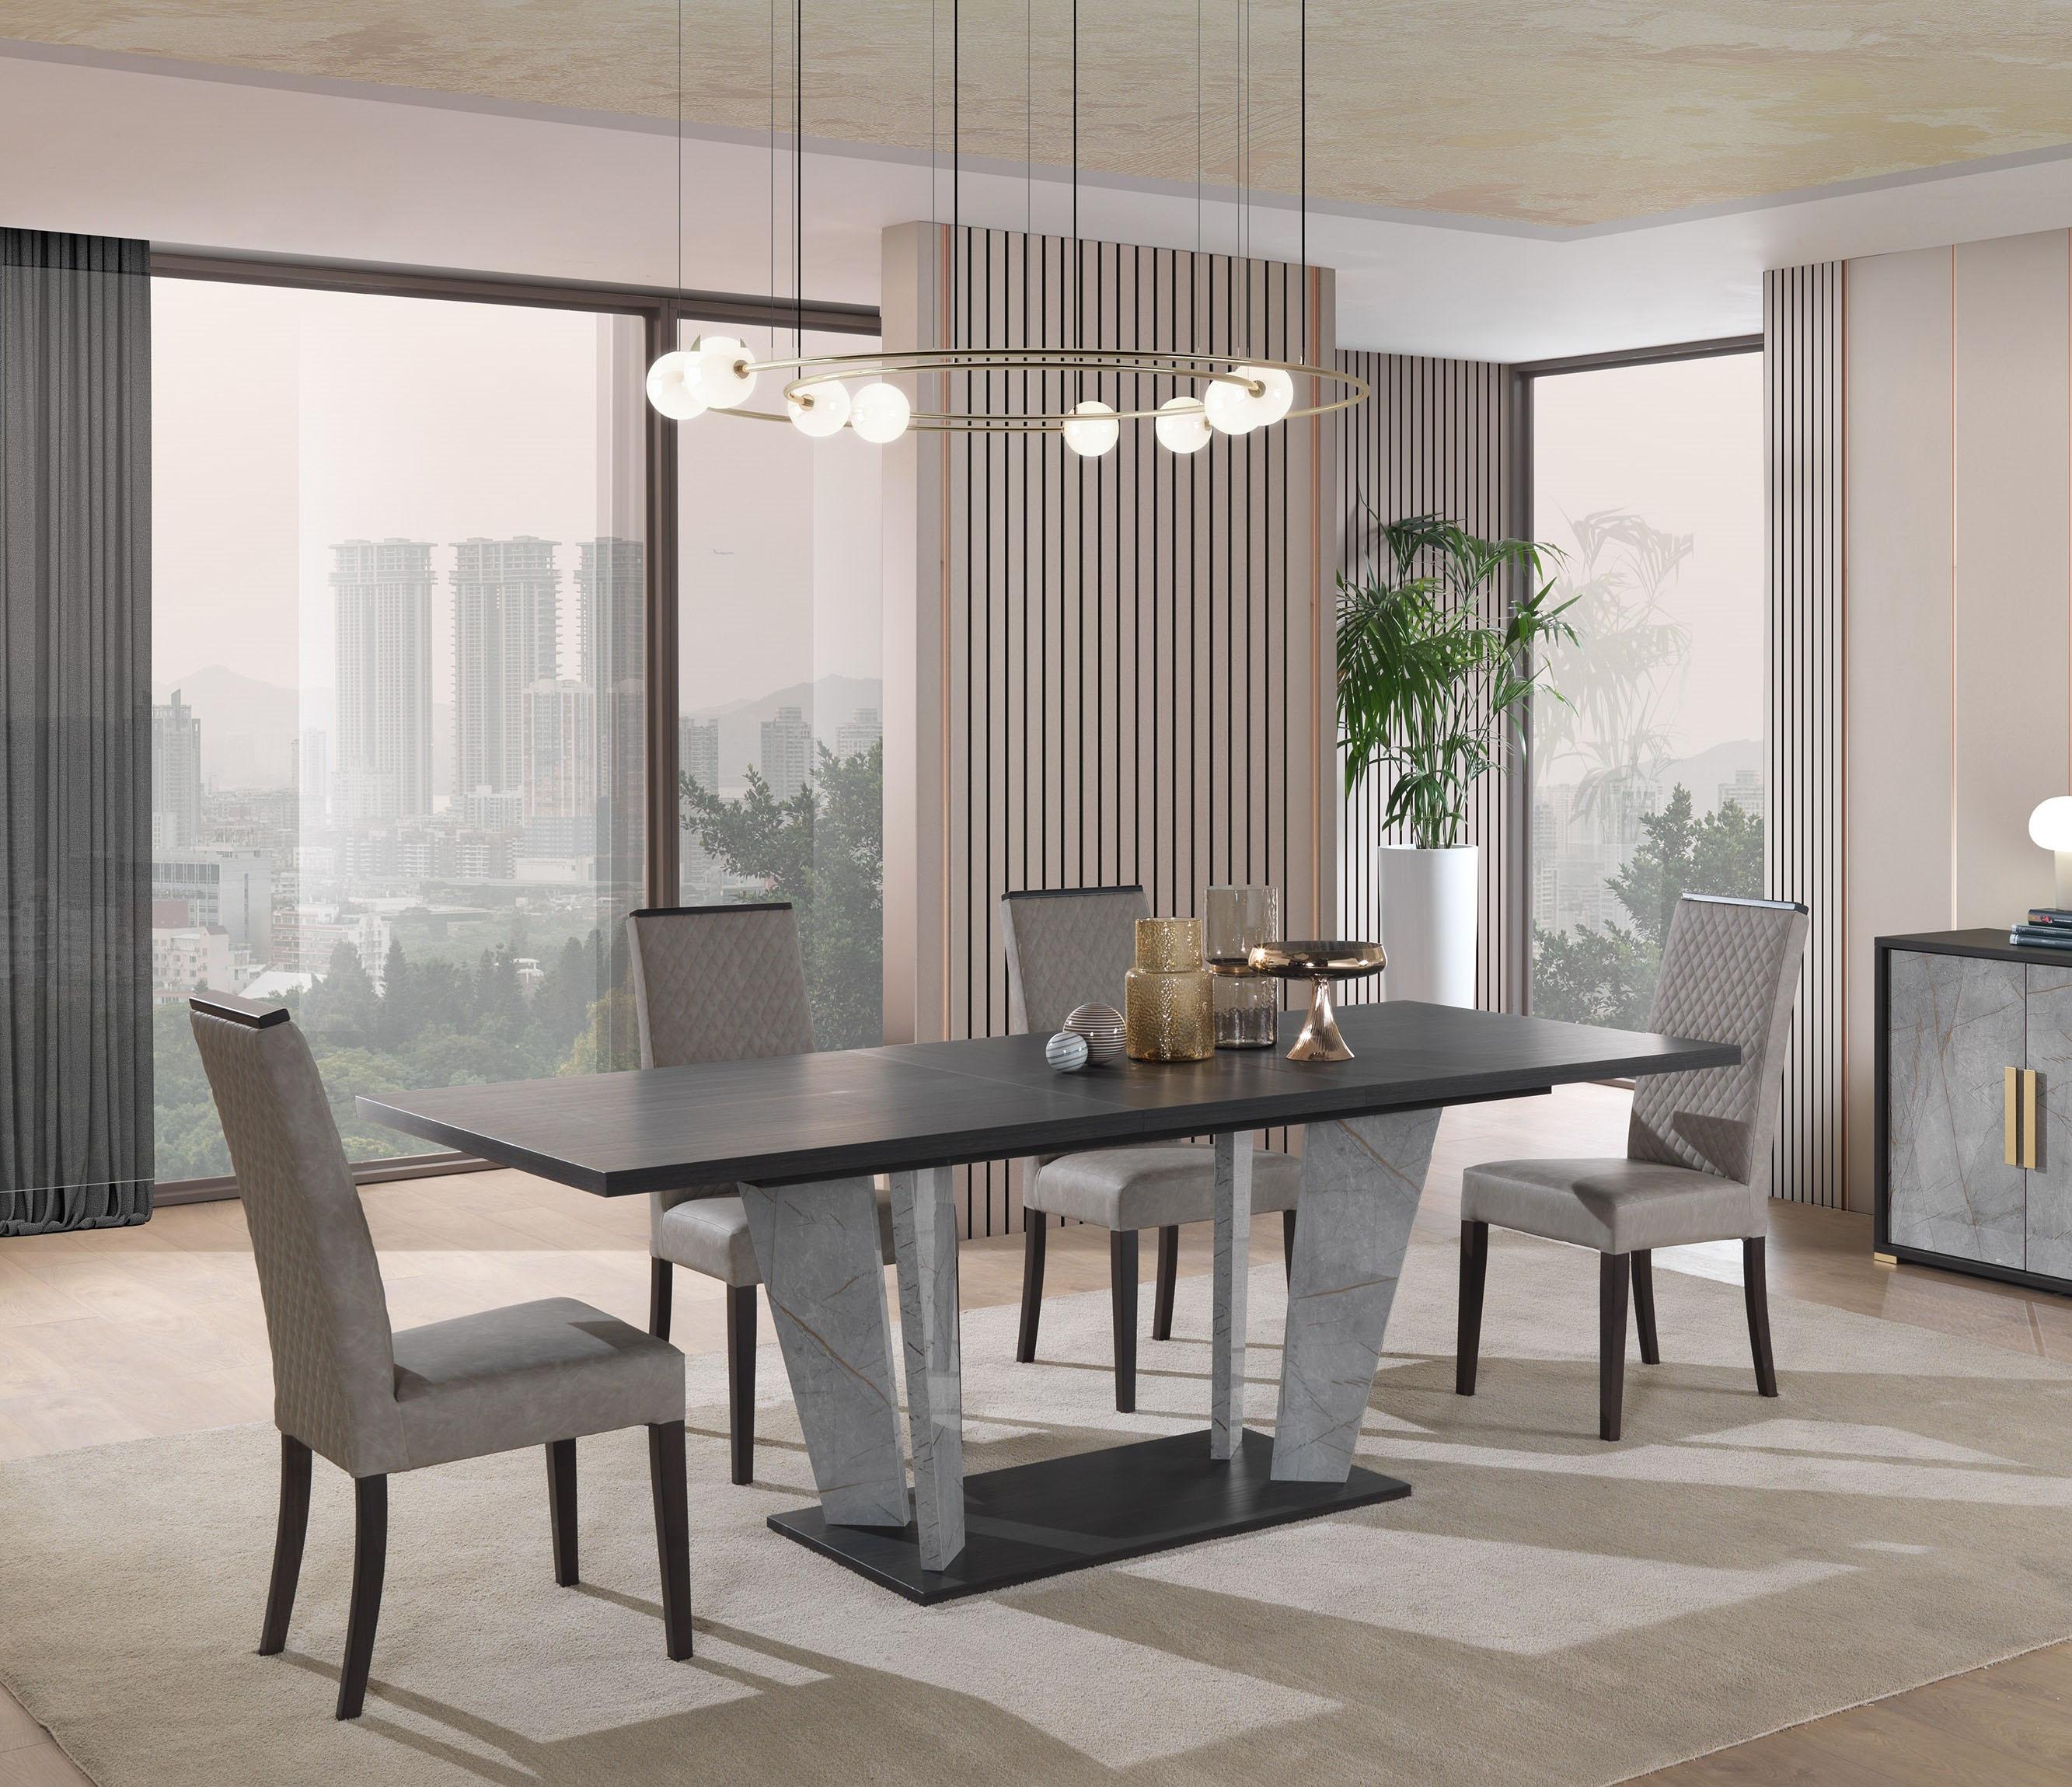 Contemporary, Modern Dining Set Travertine SKU18772-7PC in Wenge, Gray Eco Leather